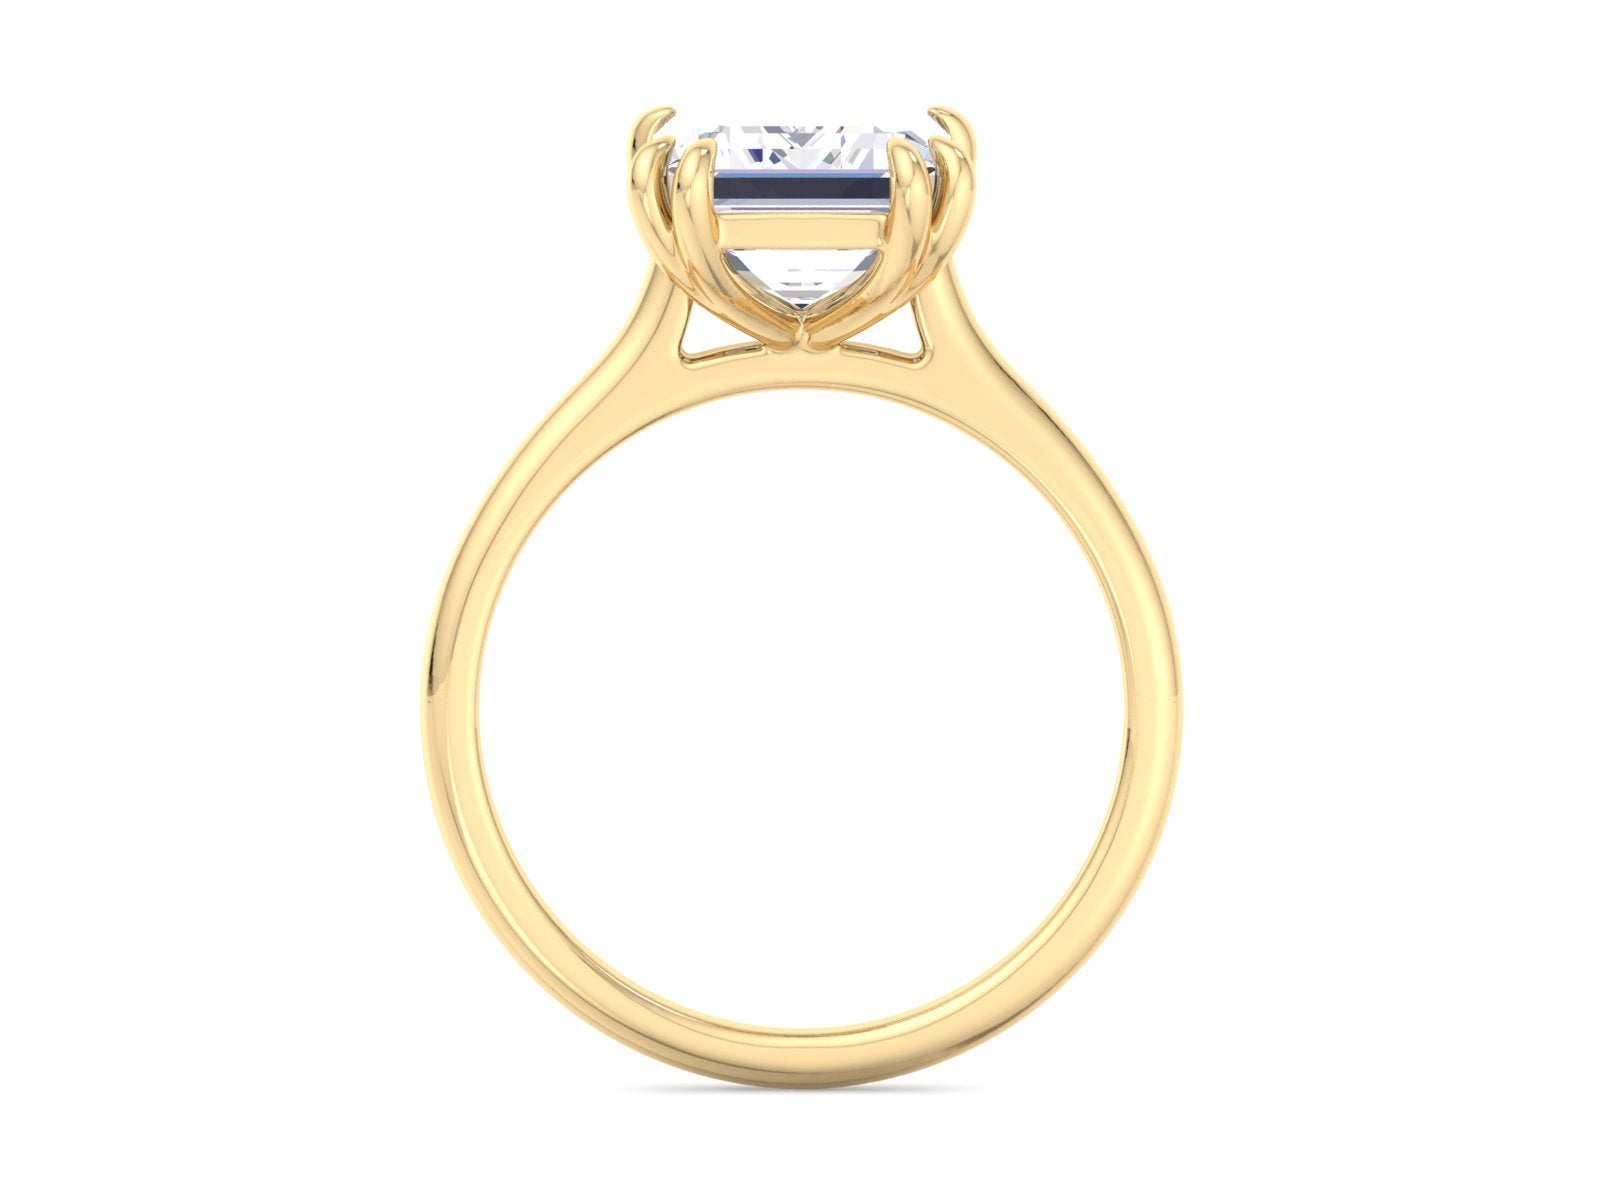 3.8CT Emerald Cut Moissanite Ring, 14K Solid Yellow Gold Solitaire Engagement Ring